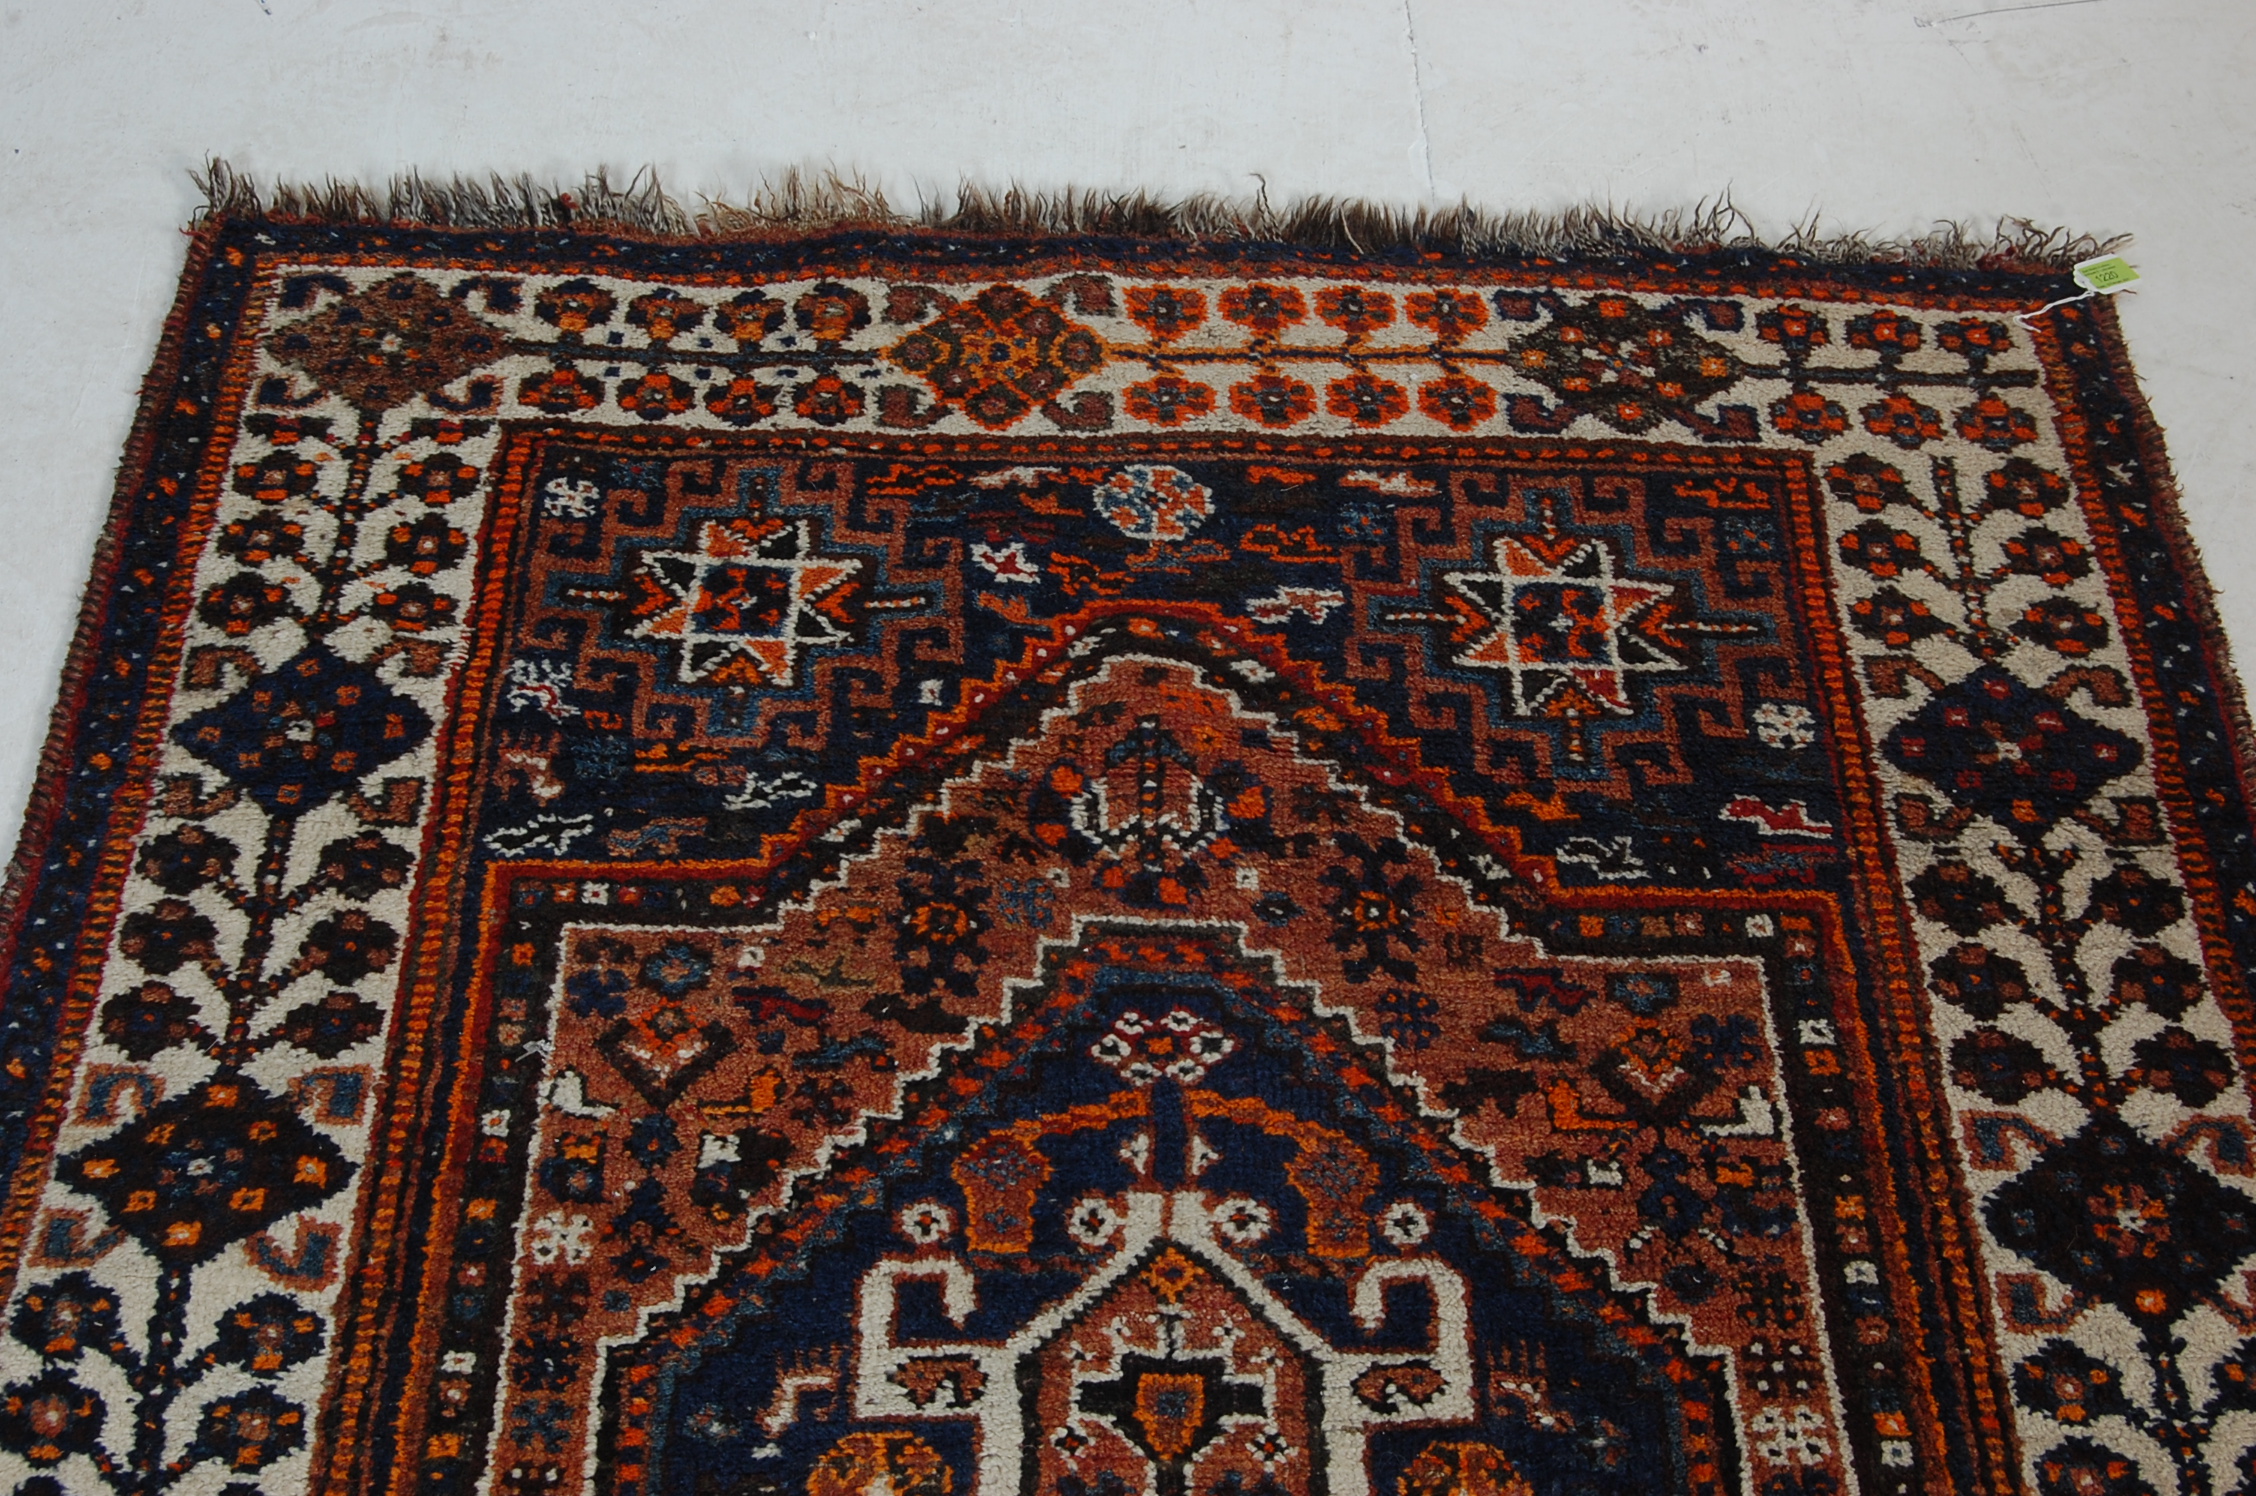 EARLY 20TH CENTURY NATURAL DYED AND HAND-WOVEN WOOL AFGHAN RUG / CARPET - Image 5 of 6